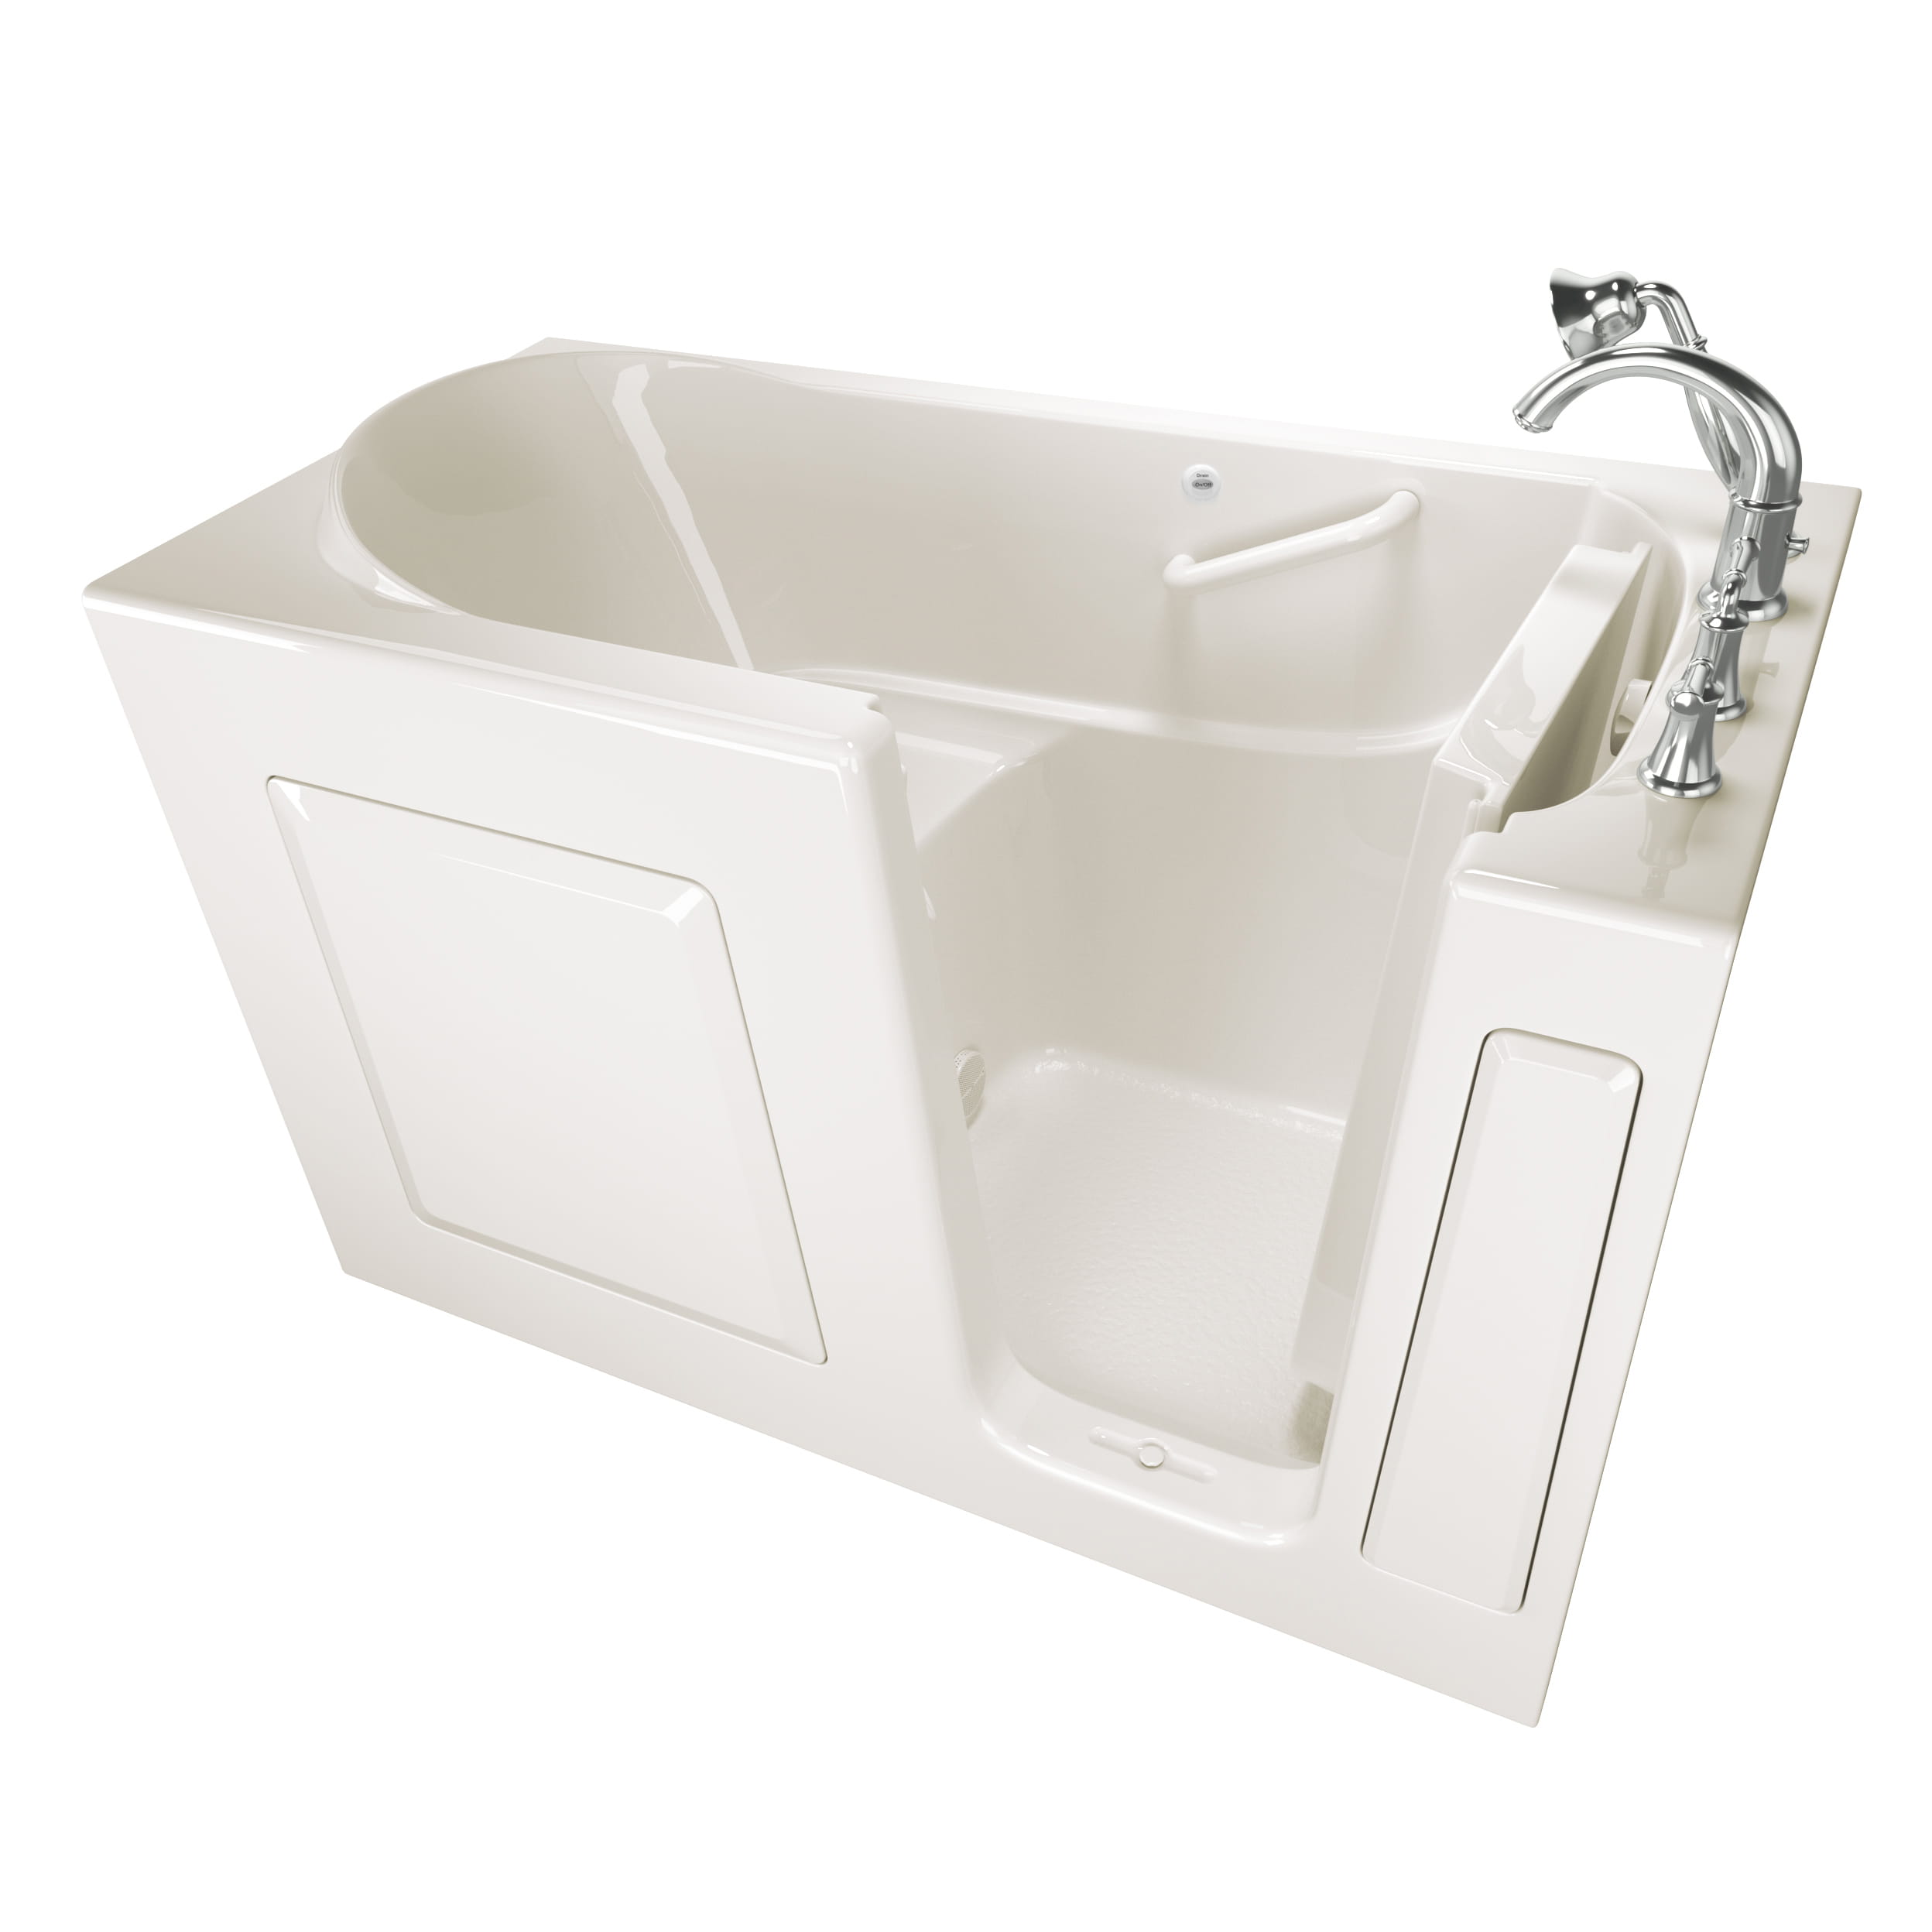 Gelcoat Value Series 30 x 60 -Inch Walk-in Tub With Soaker System - Right-Hand Drain With Faucet